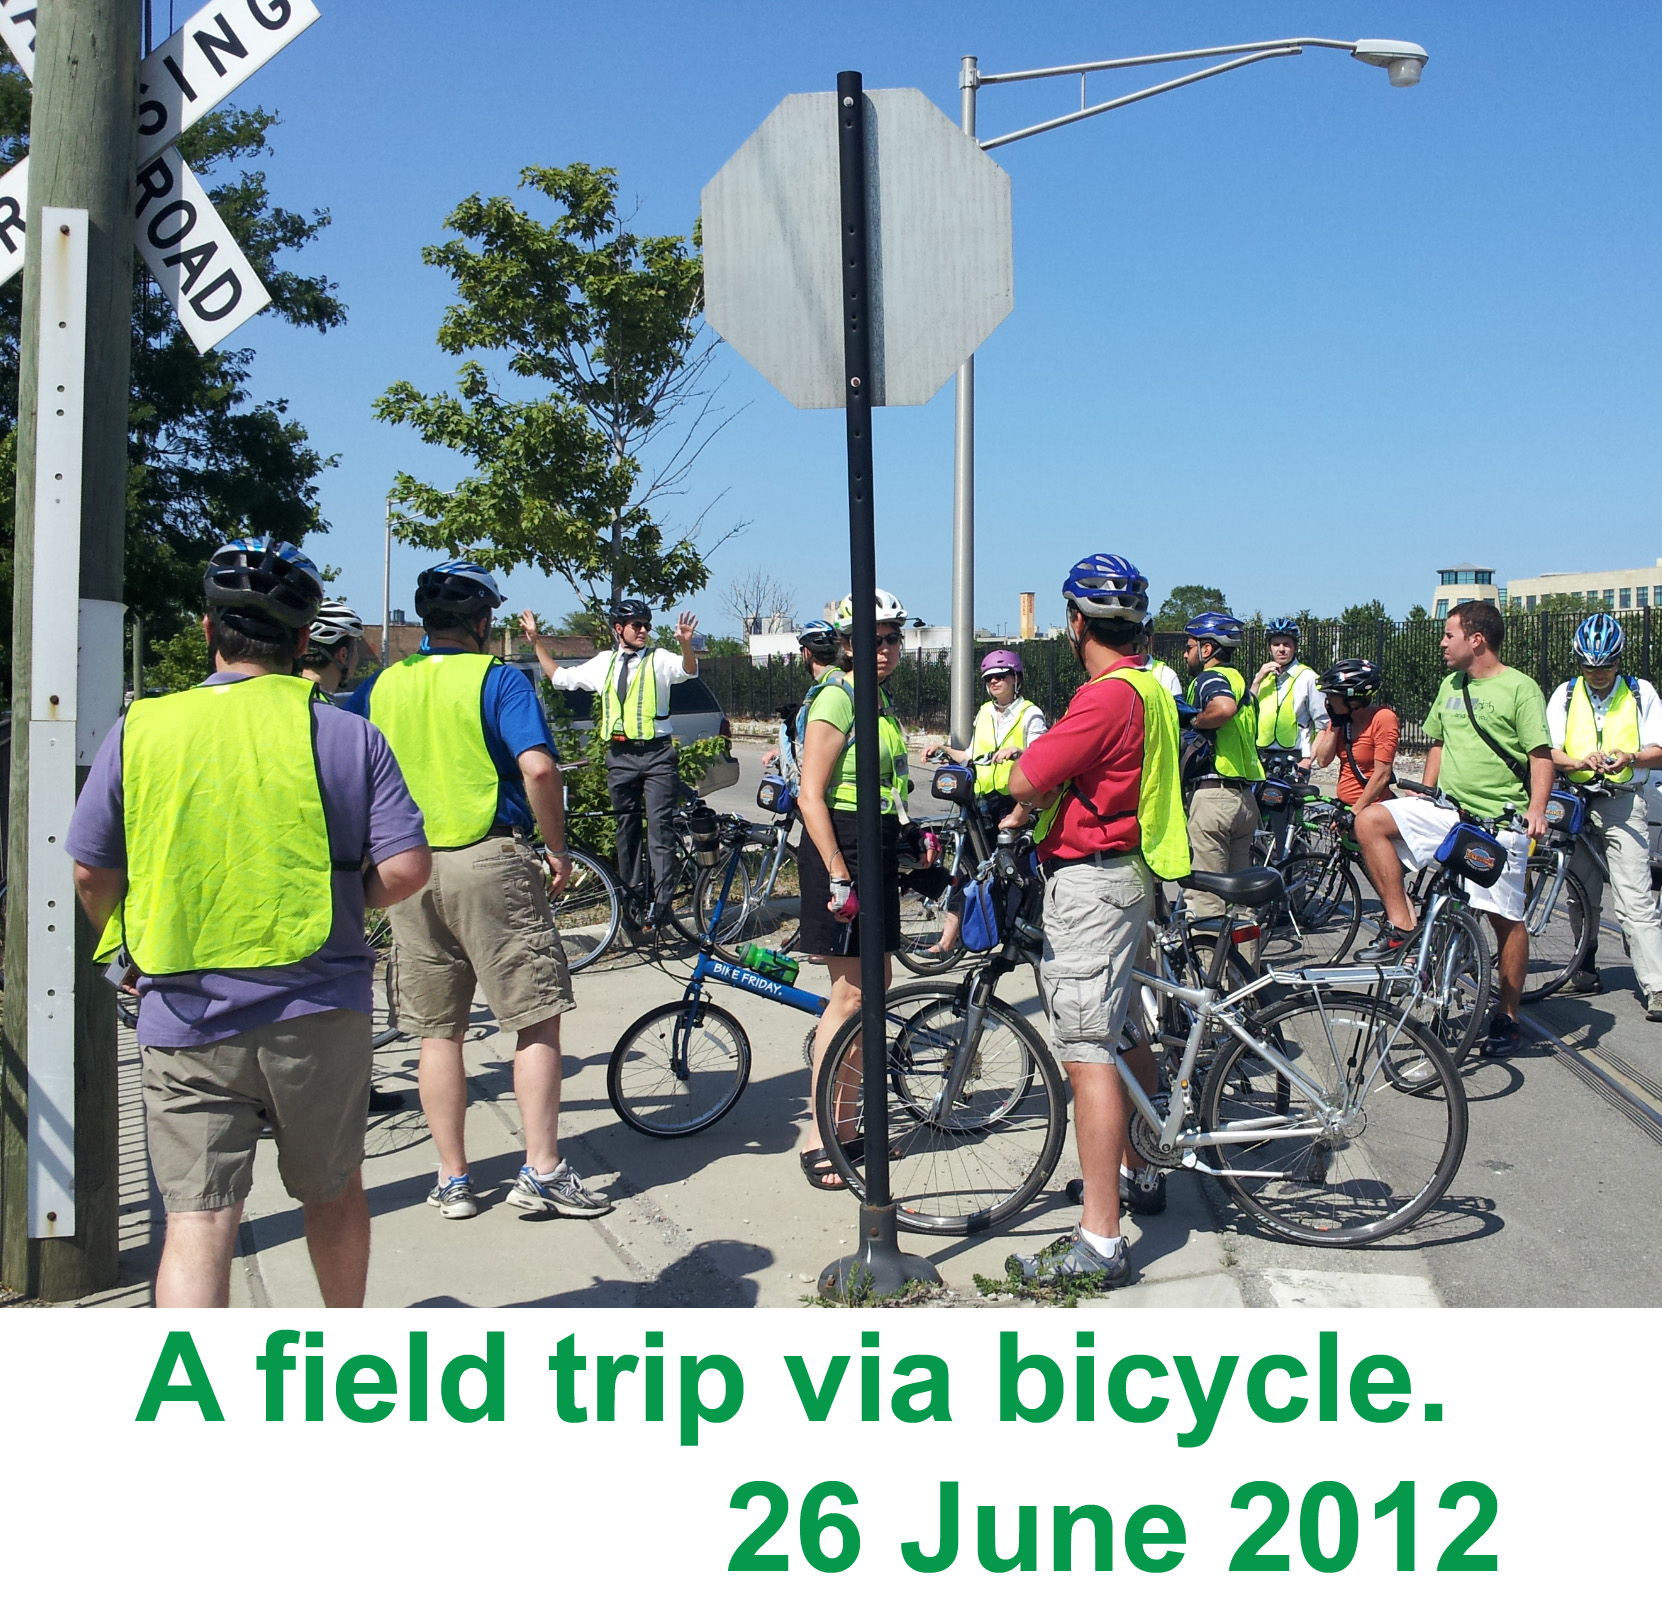 4th Urban Street Symposium: A field trip by bicycle, June 26